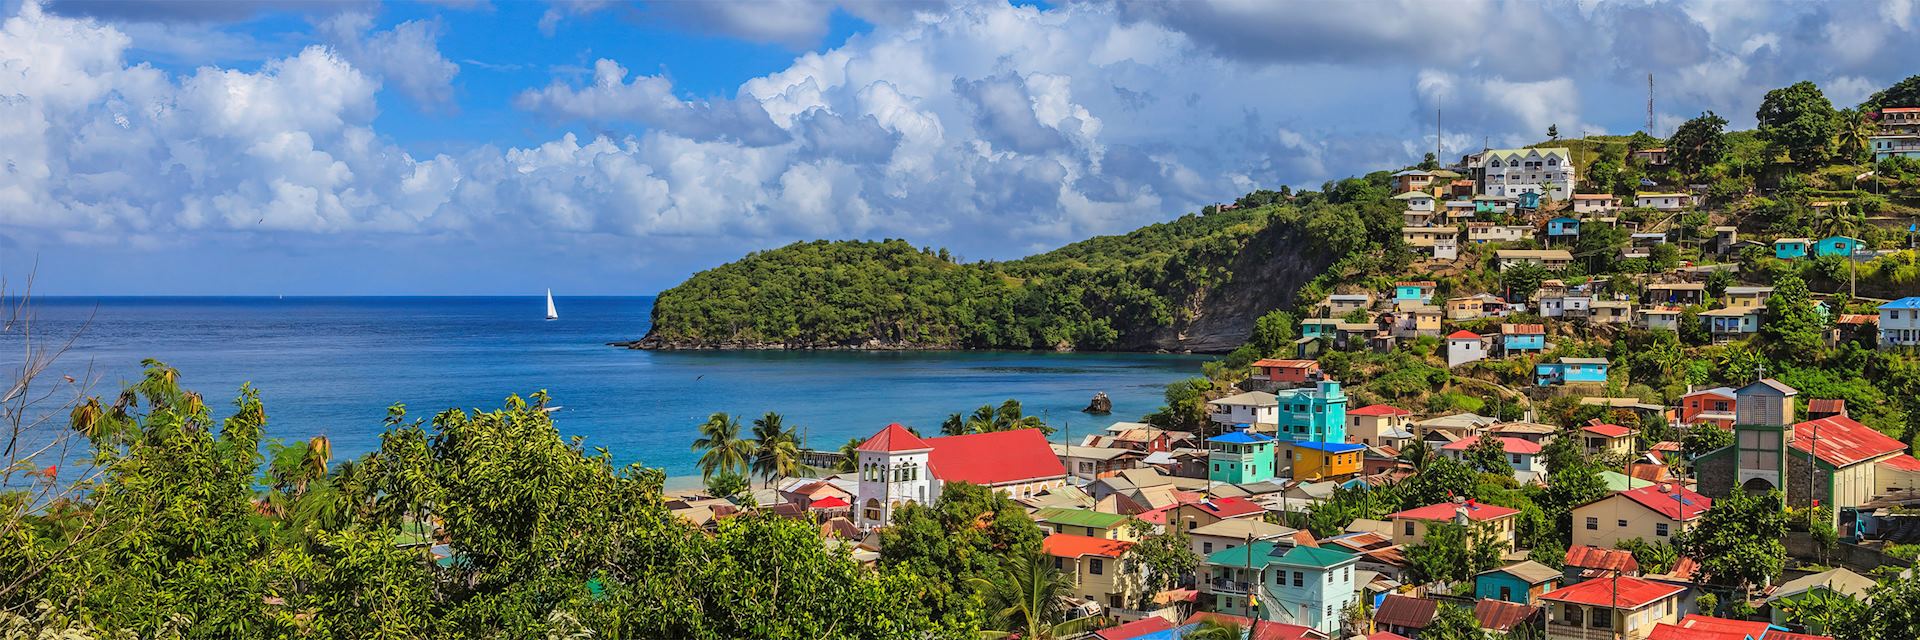 Canaries, a small village on the west coast of St Lucia